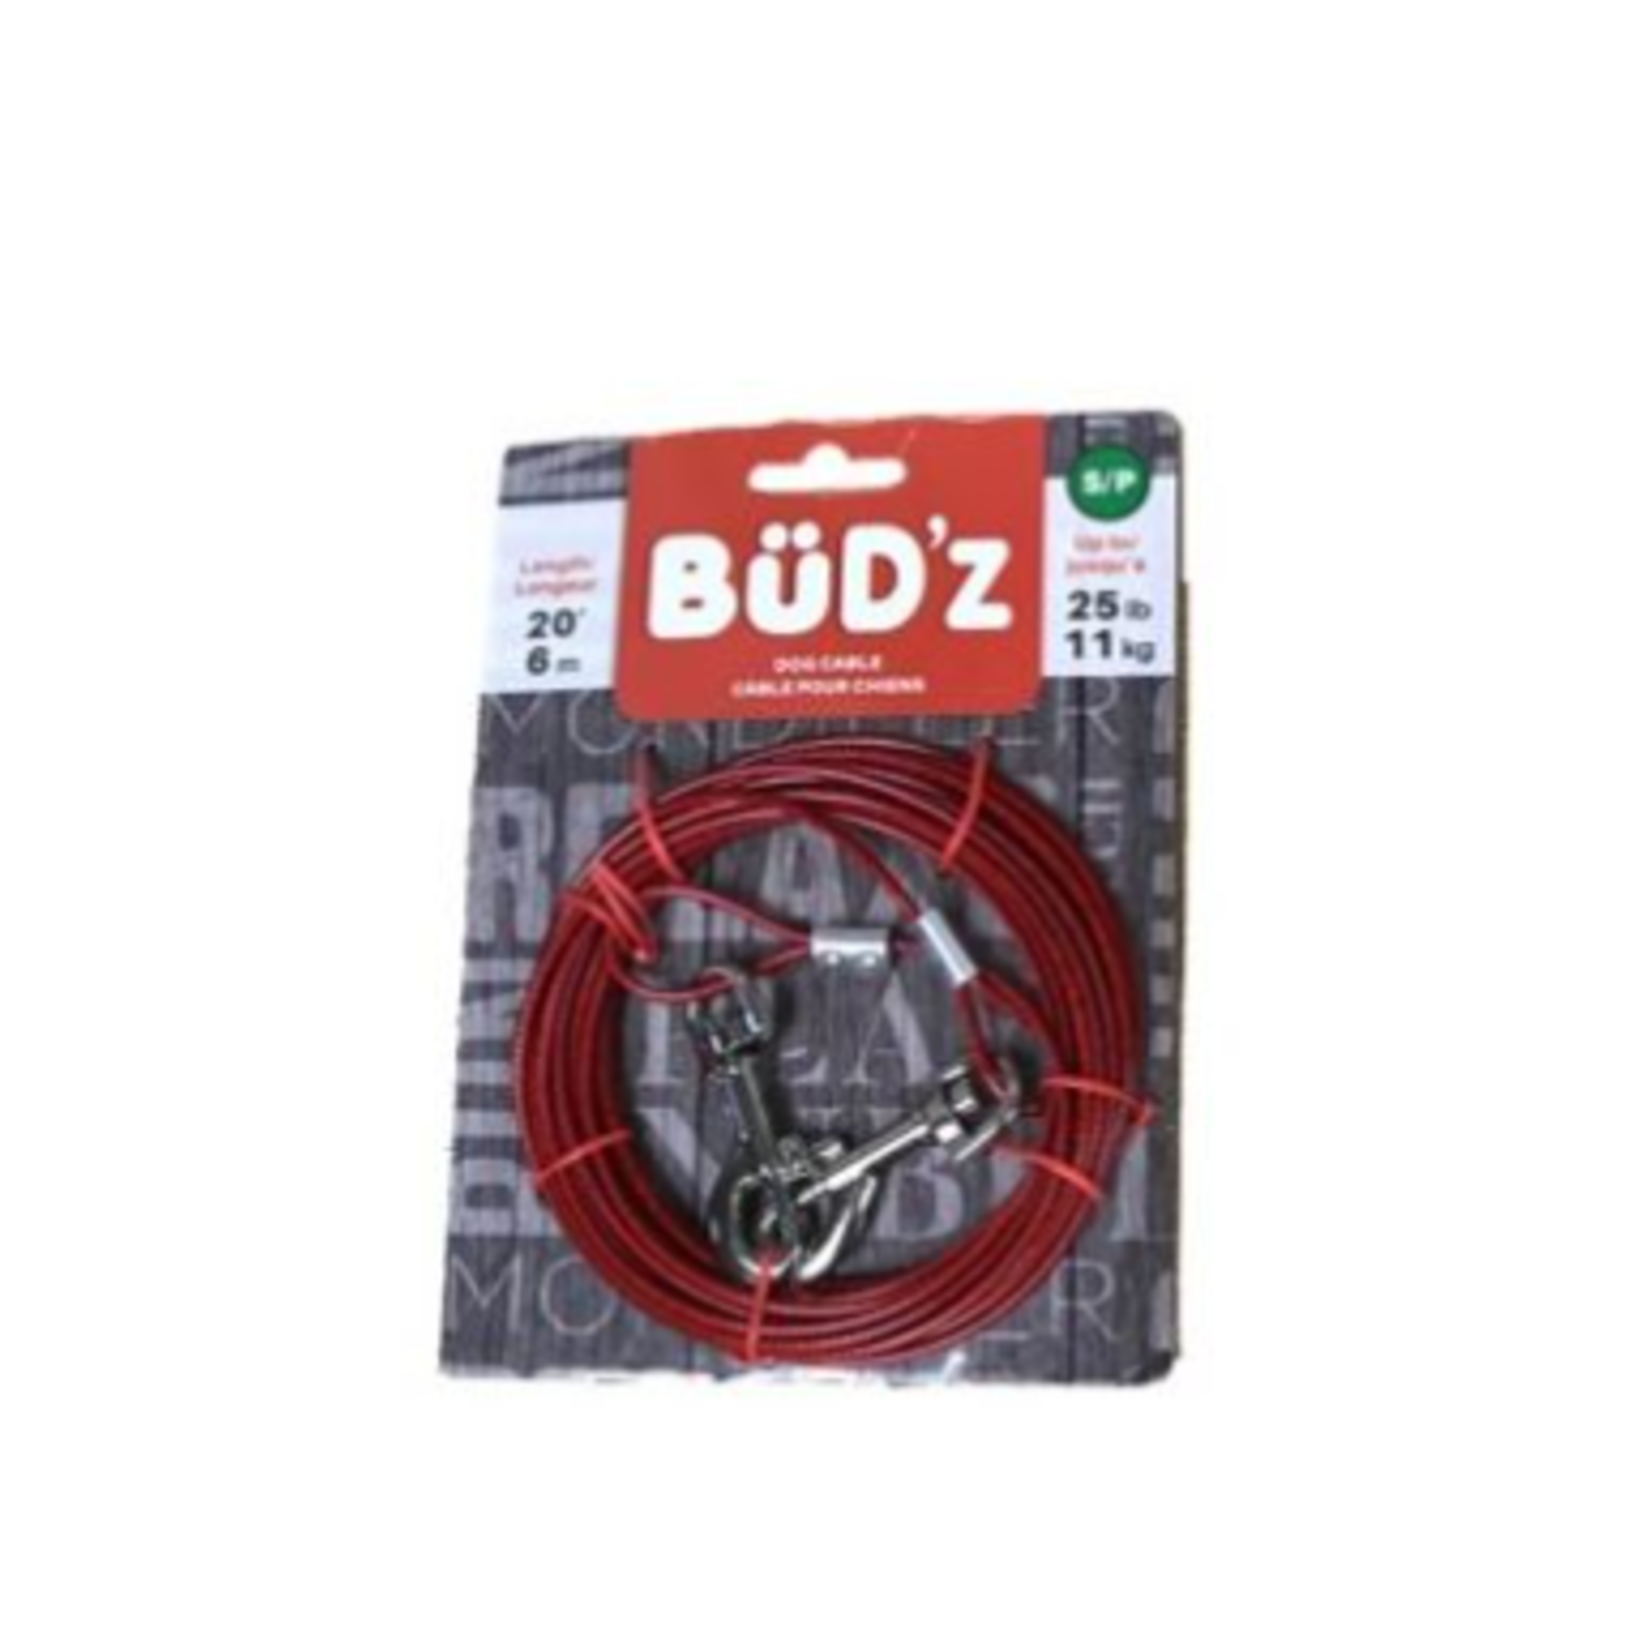 bud'z Dog Cable - 20 ft - up to 25 lbs